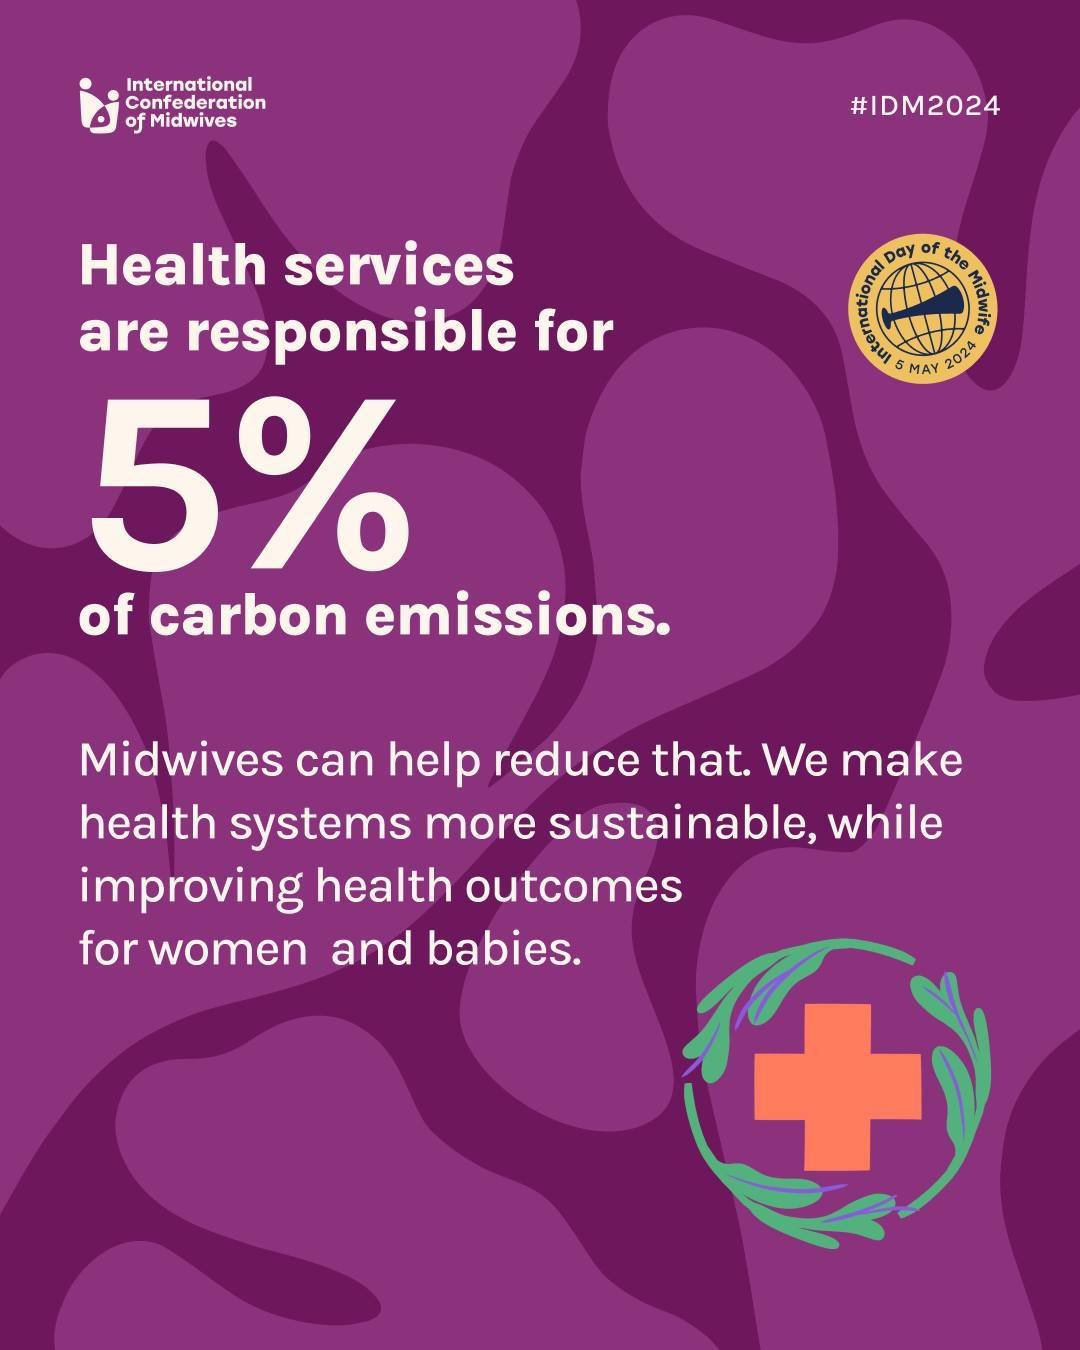 Healthcare services are responsible for 5% of greenhouse gas emissions globally. 🌿⚠️

Continuity of midwife care improves maternal health outcomes and ensures more babies are born alive, on time and healthy.

Better health outcomes mean mothers and 